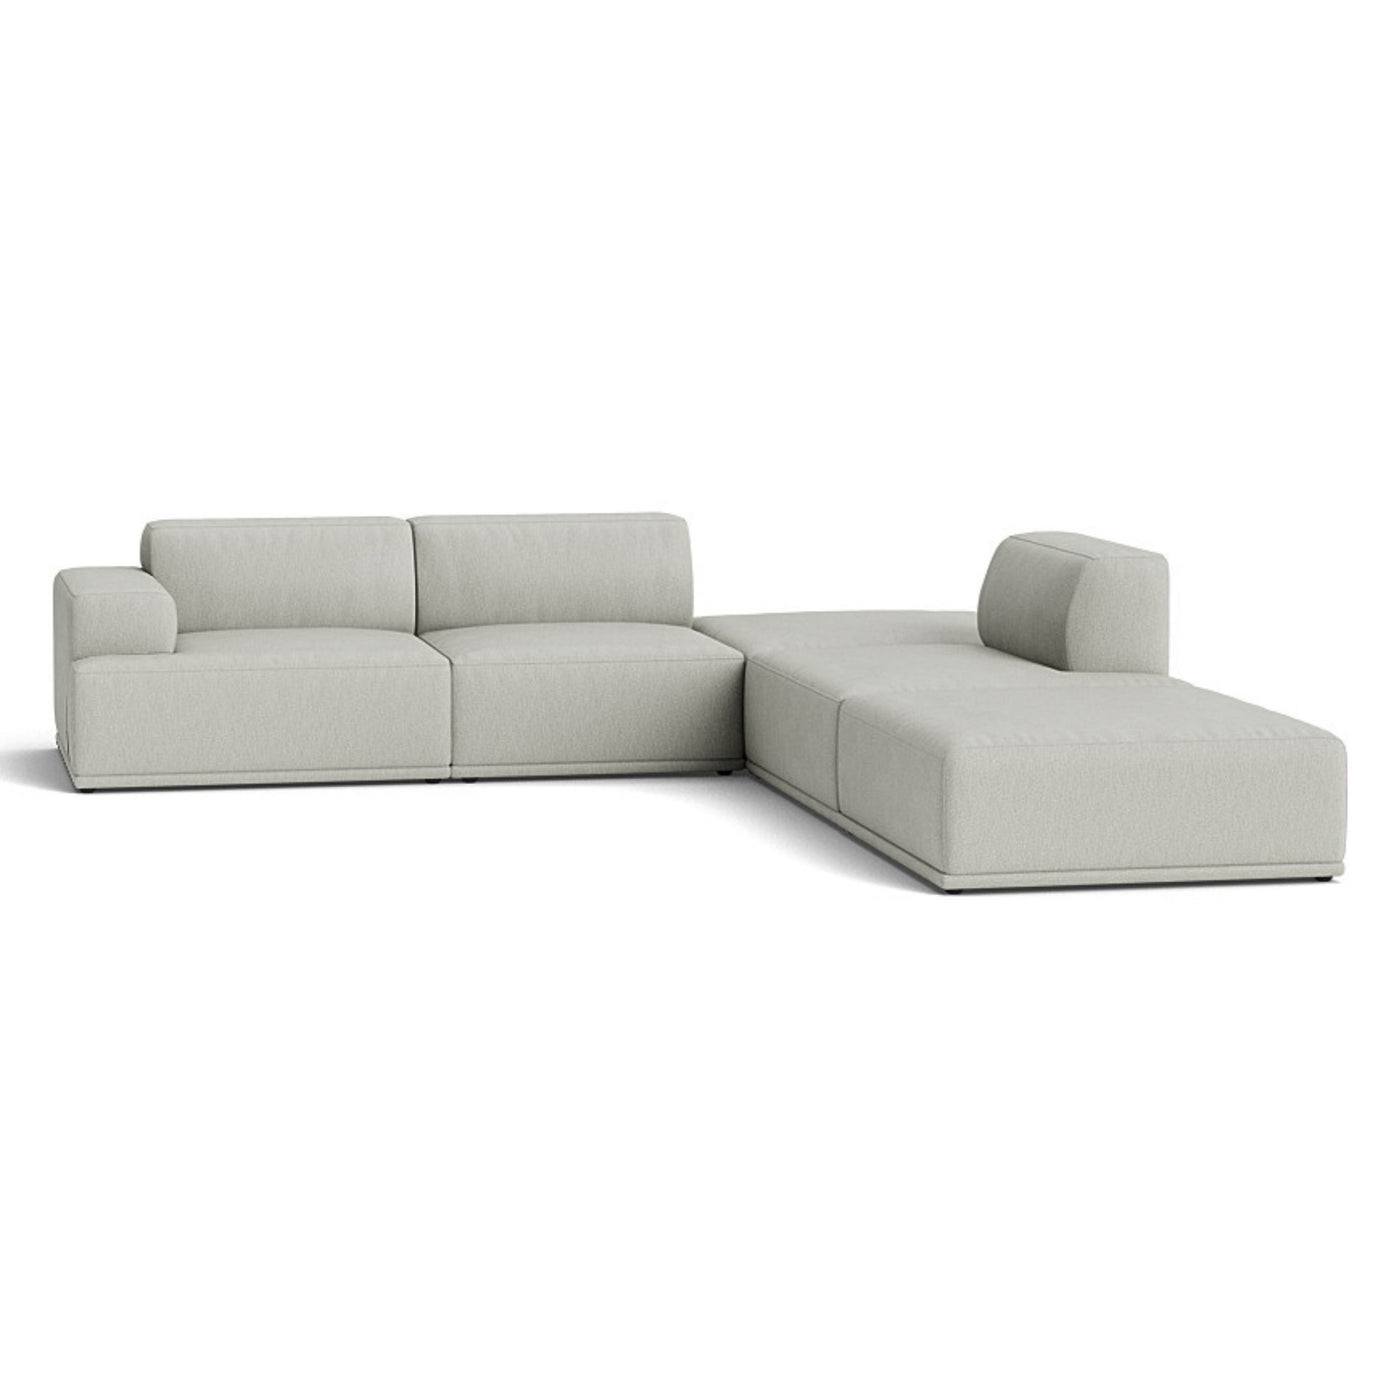 Muuto Connect Soft Modular Corner Sofa, configuration 3. made-to-order from someday designs. #colour_clay-12